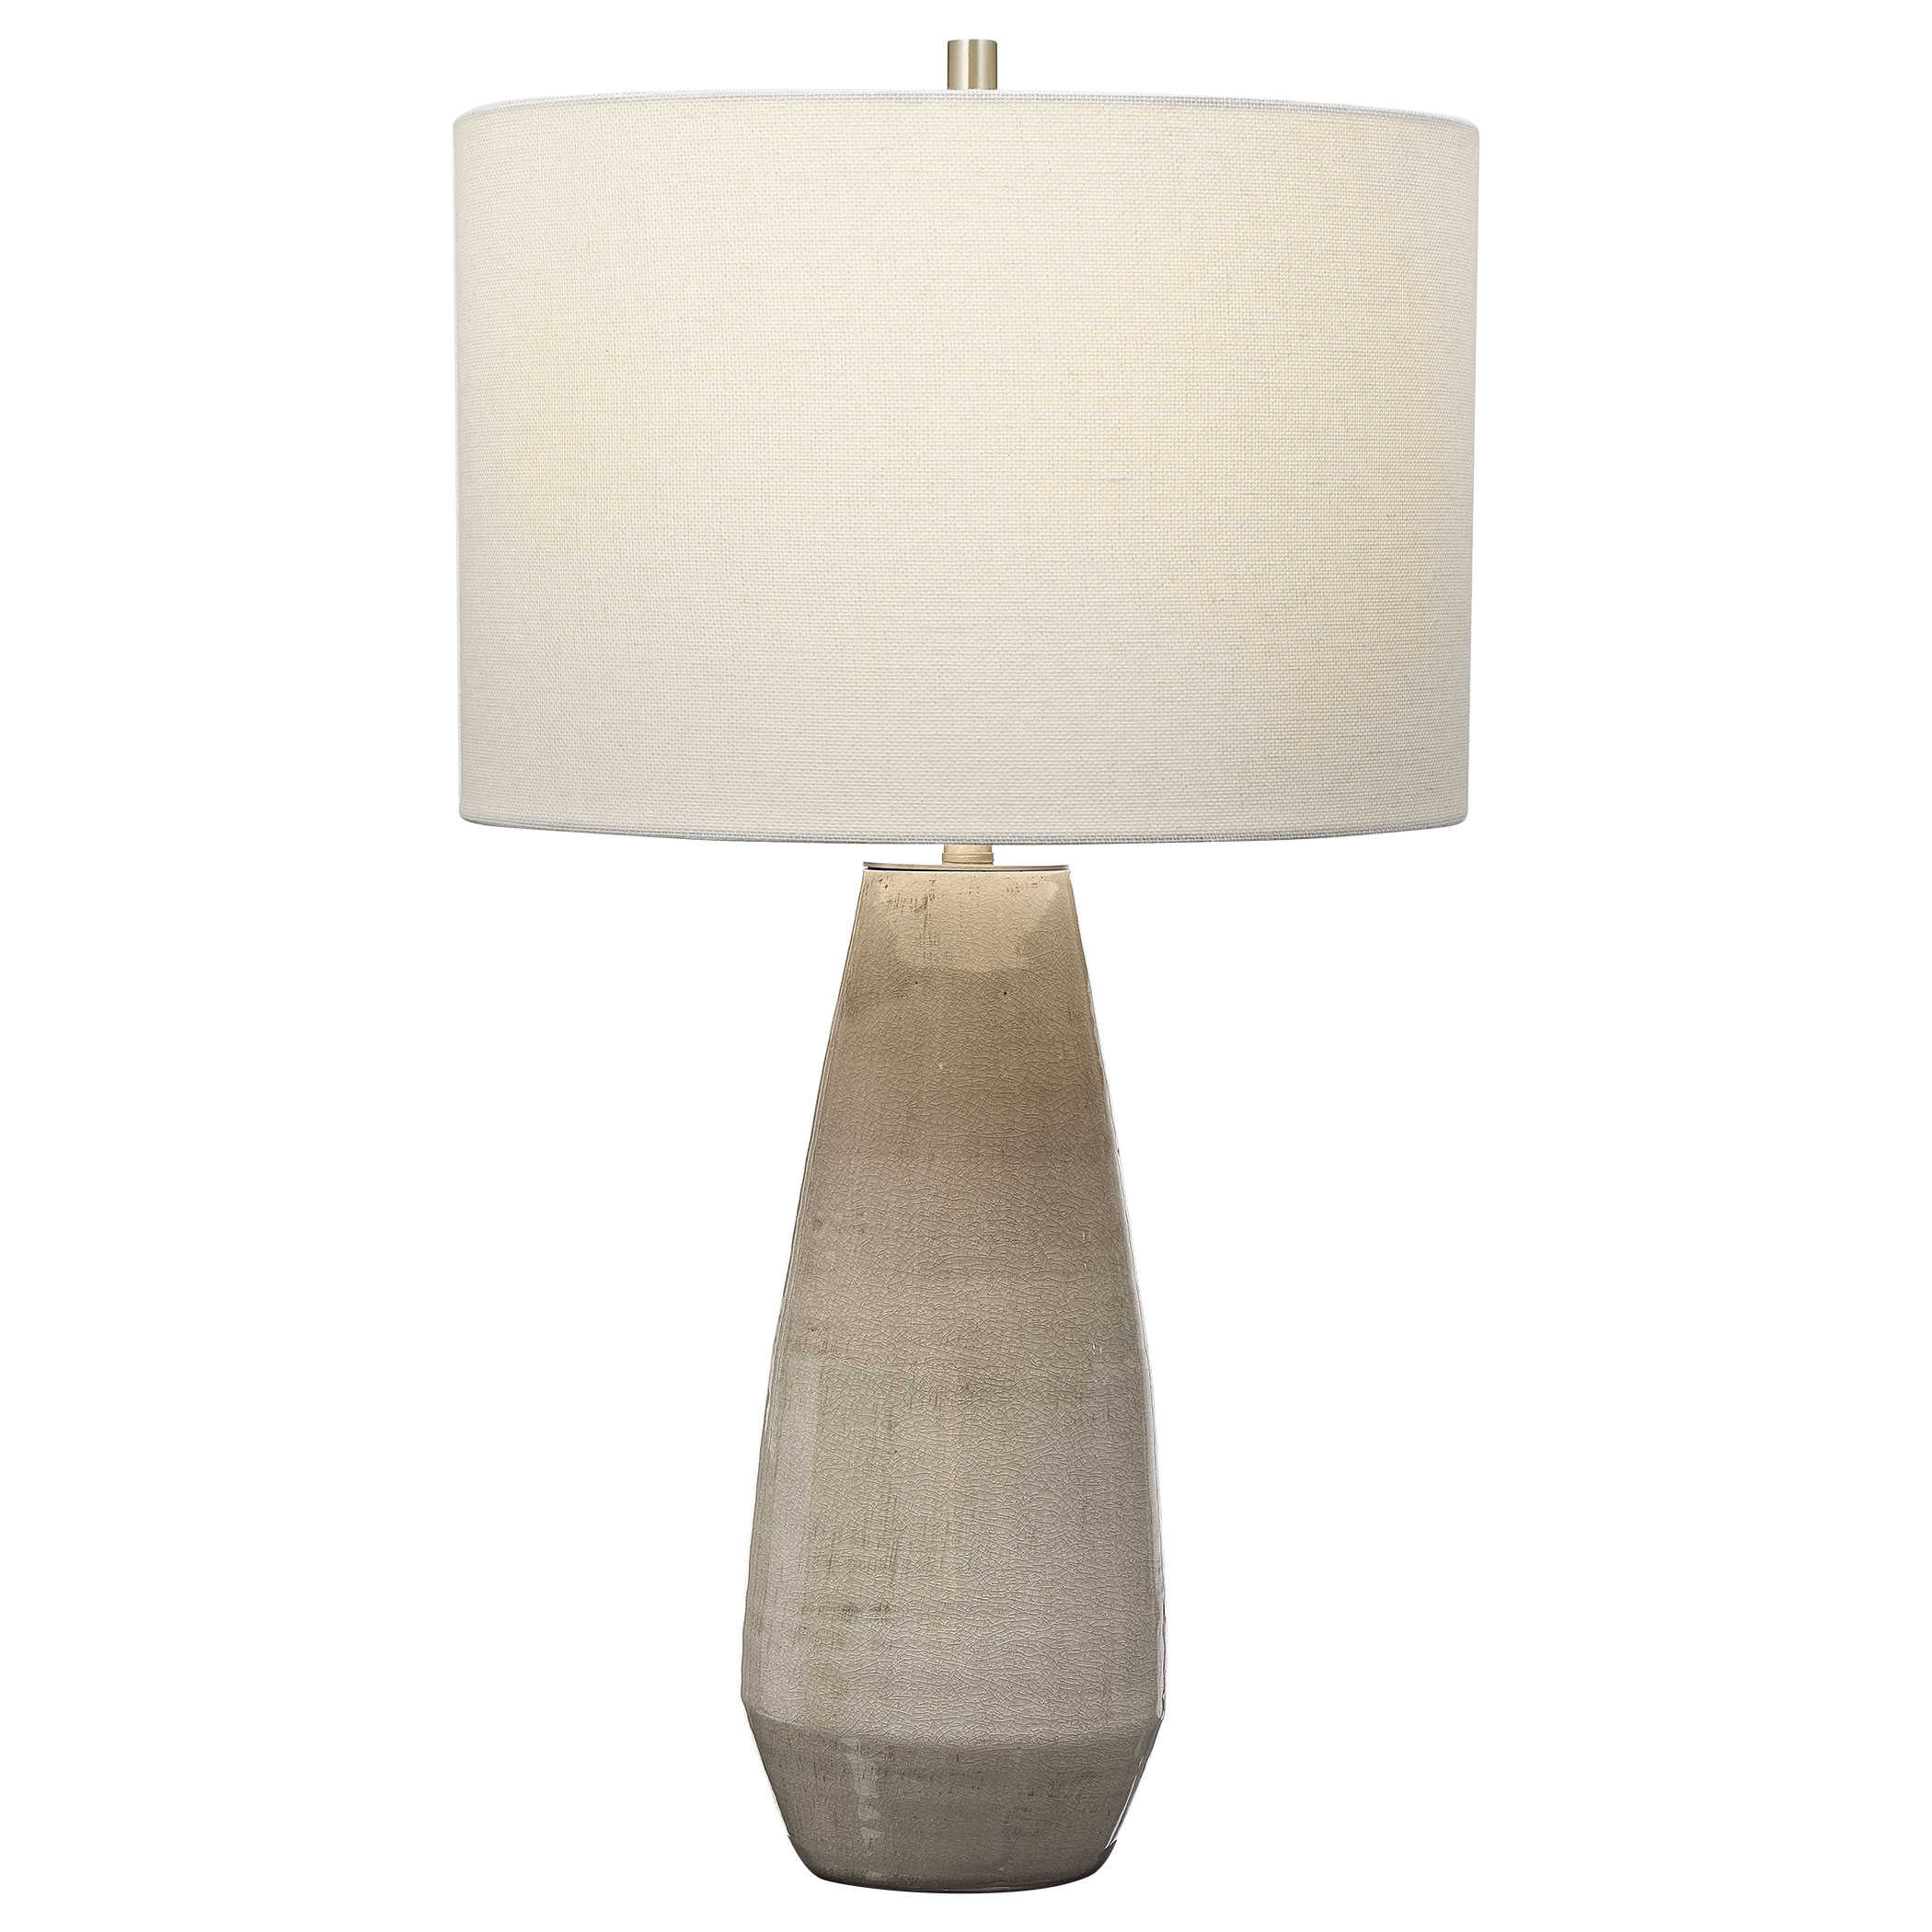 Uttermost Volterra Taupe-Gray Table Lamp Taupe-Gray Table Lamp Uttermost Ceramic, Steel  